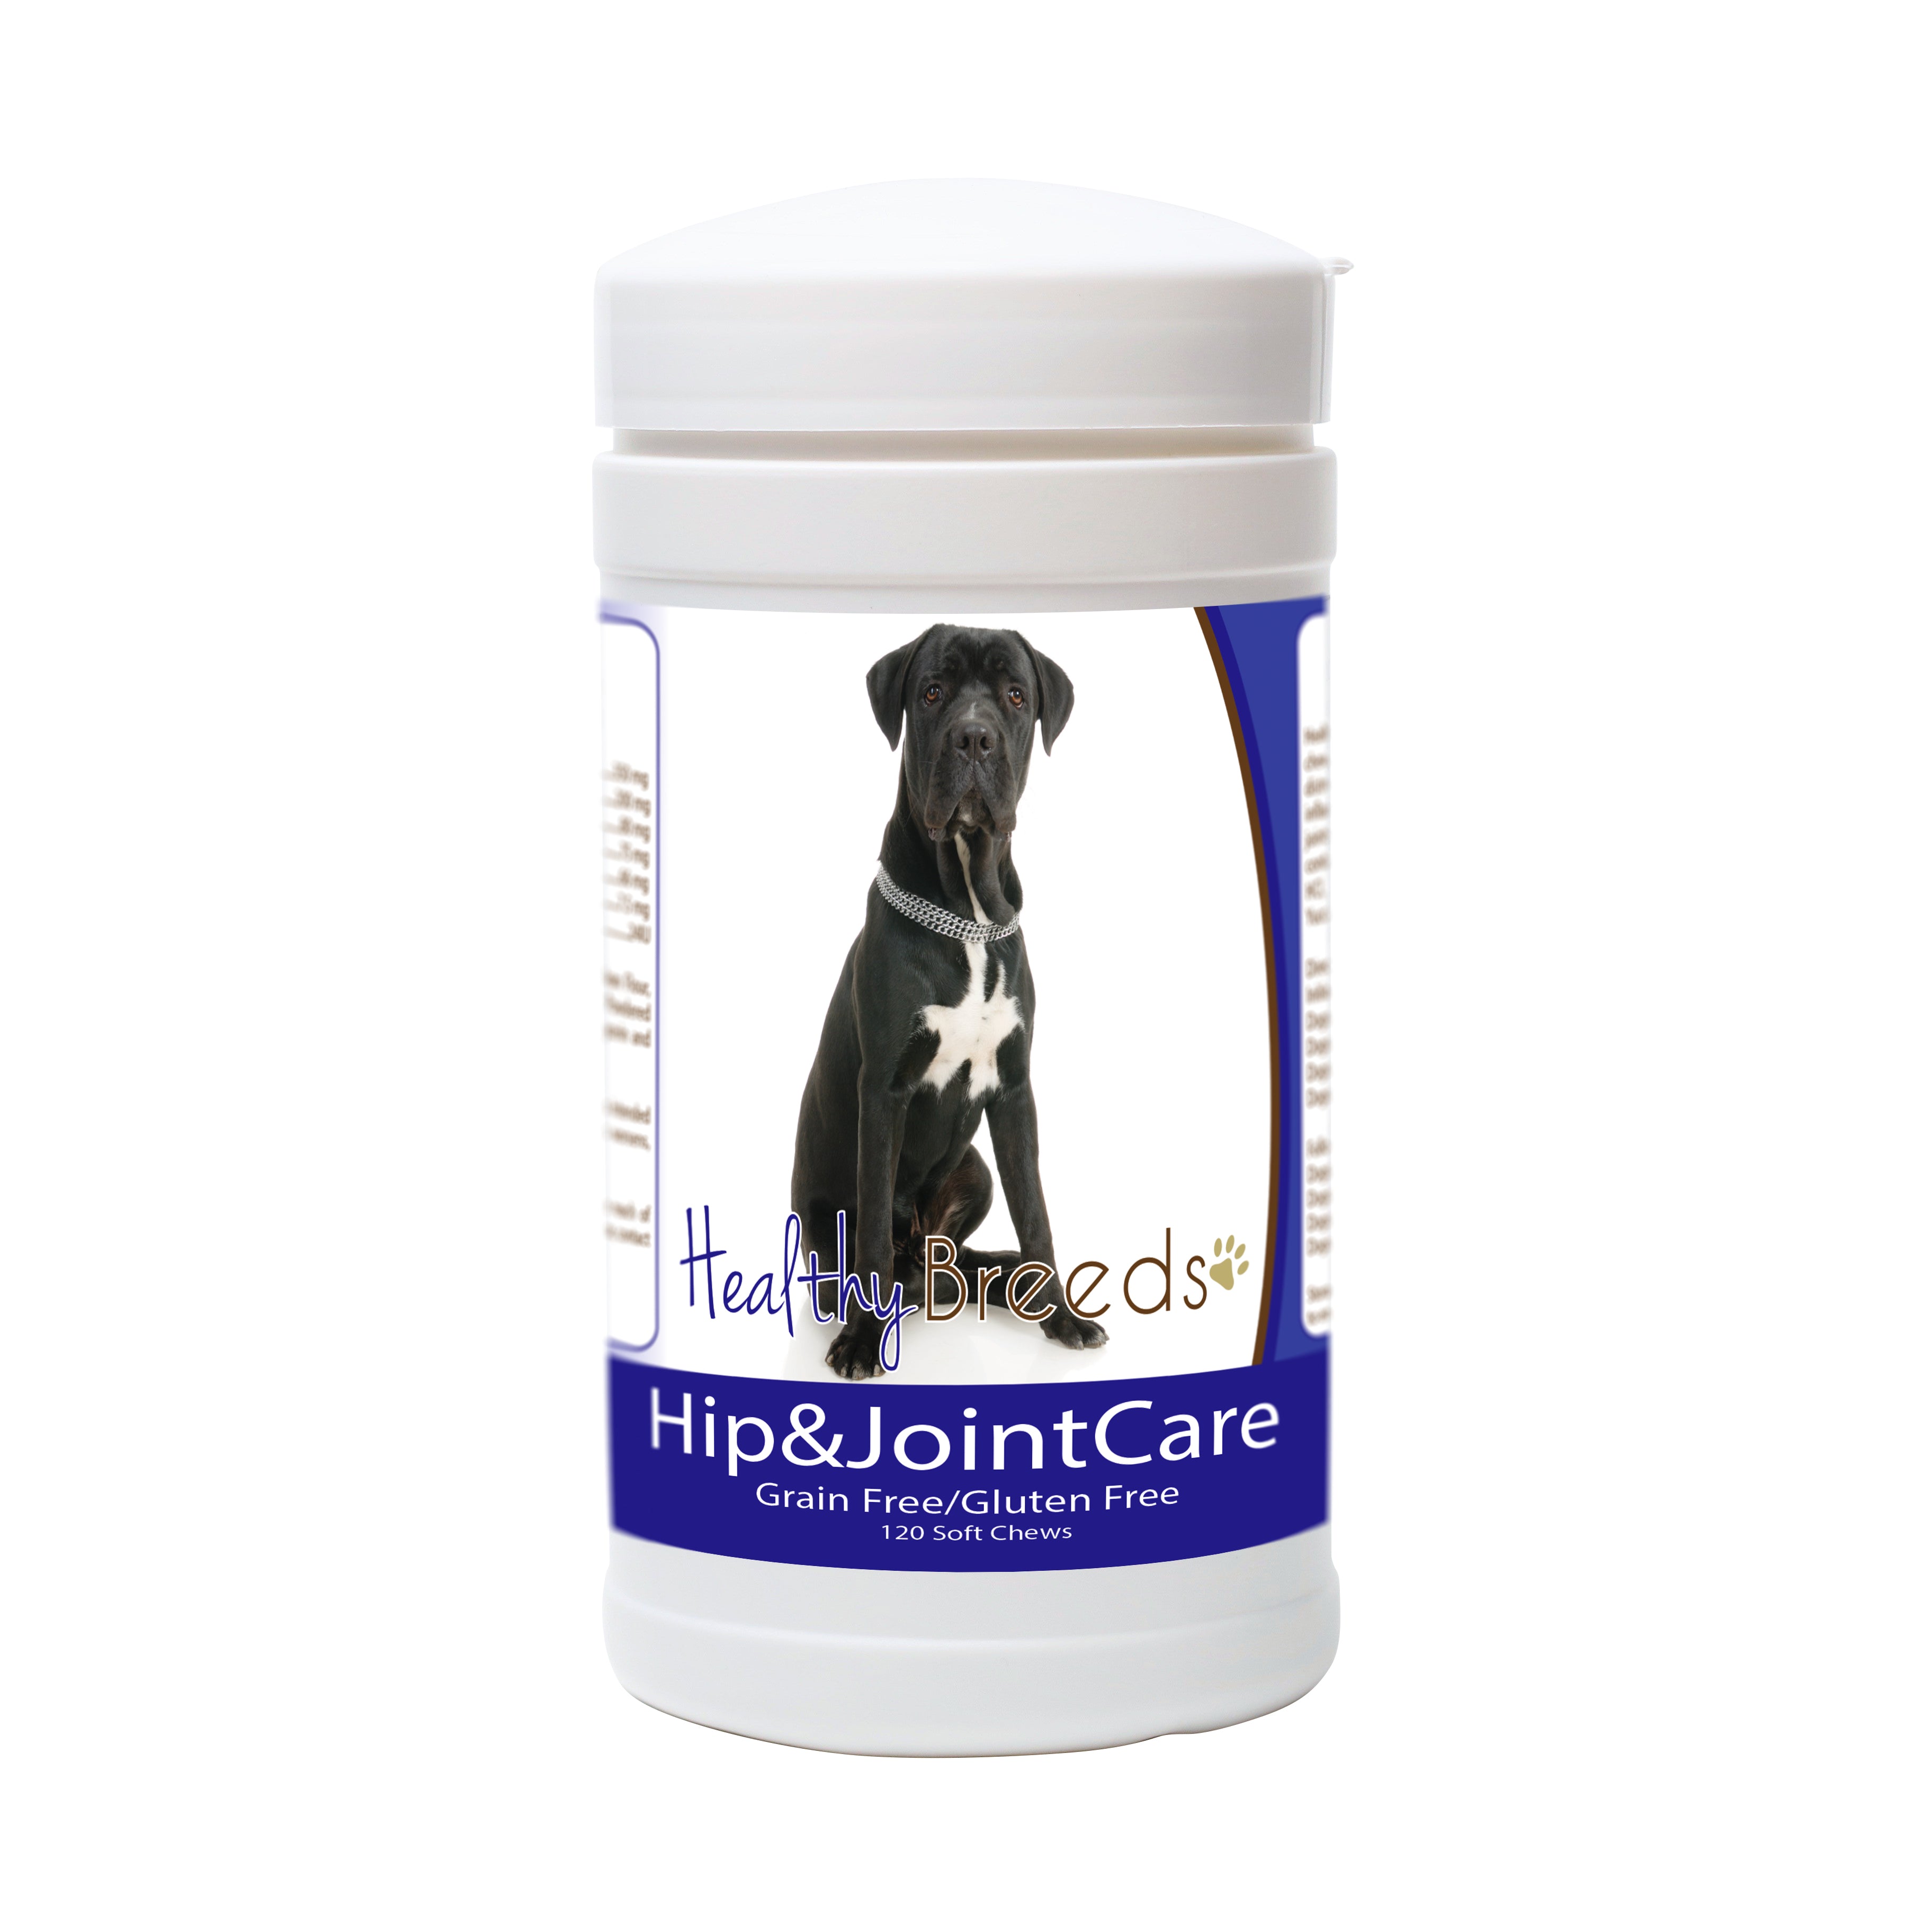 Cane Corso Hip and Joint Care 120 Count